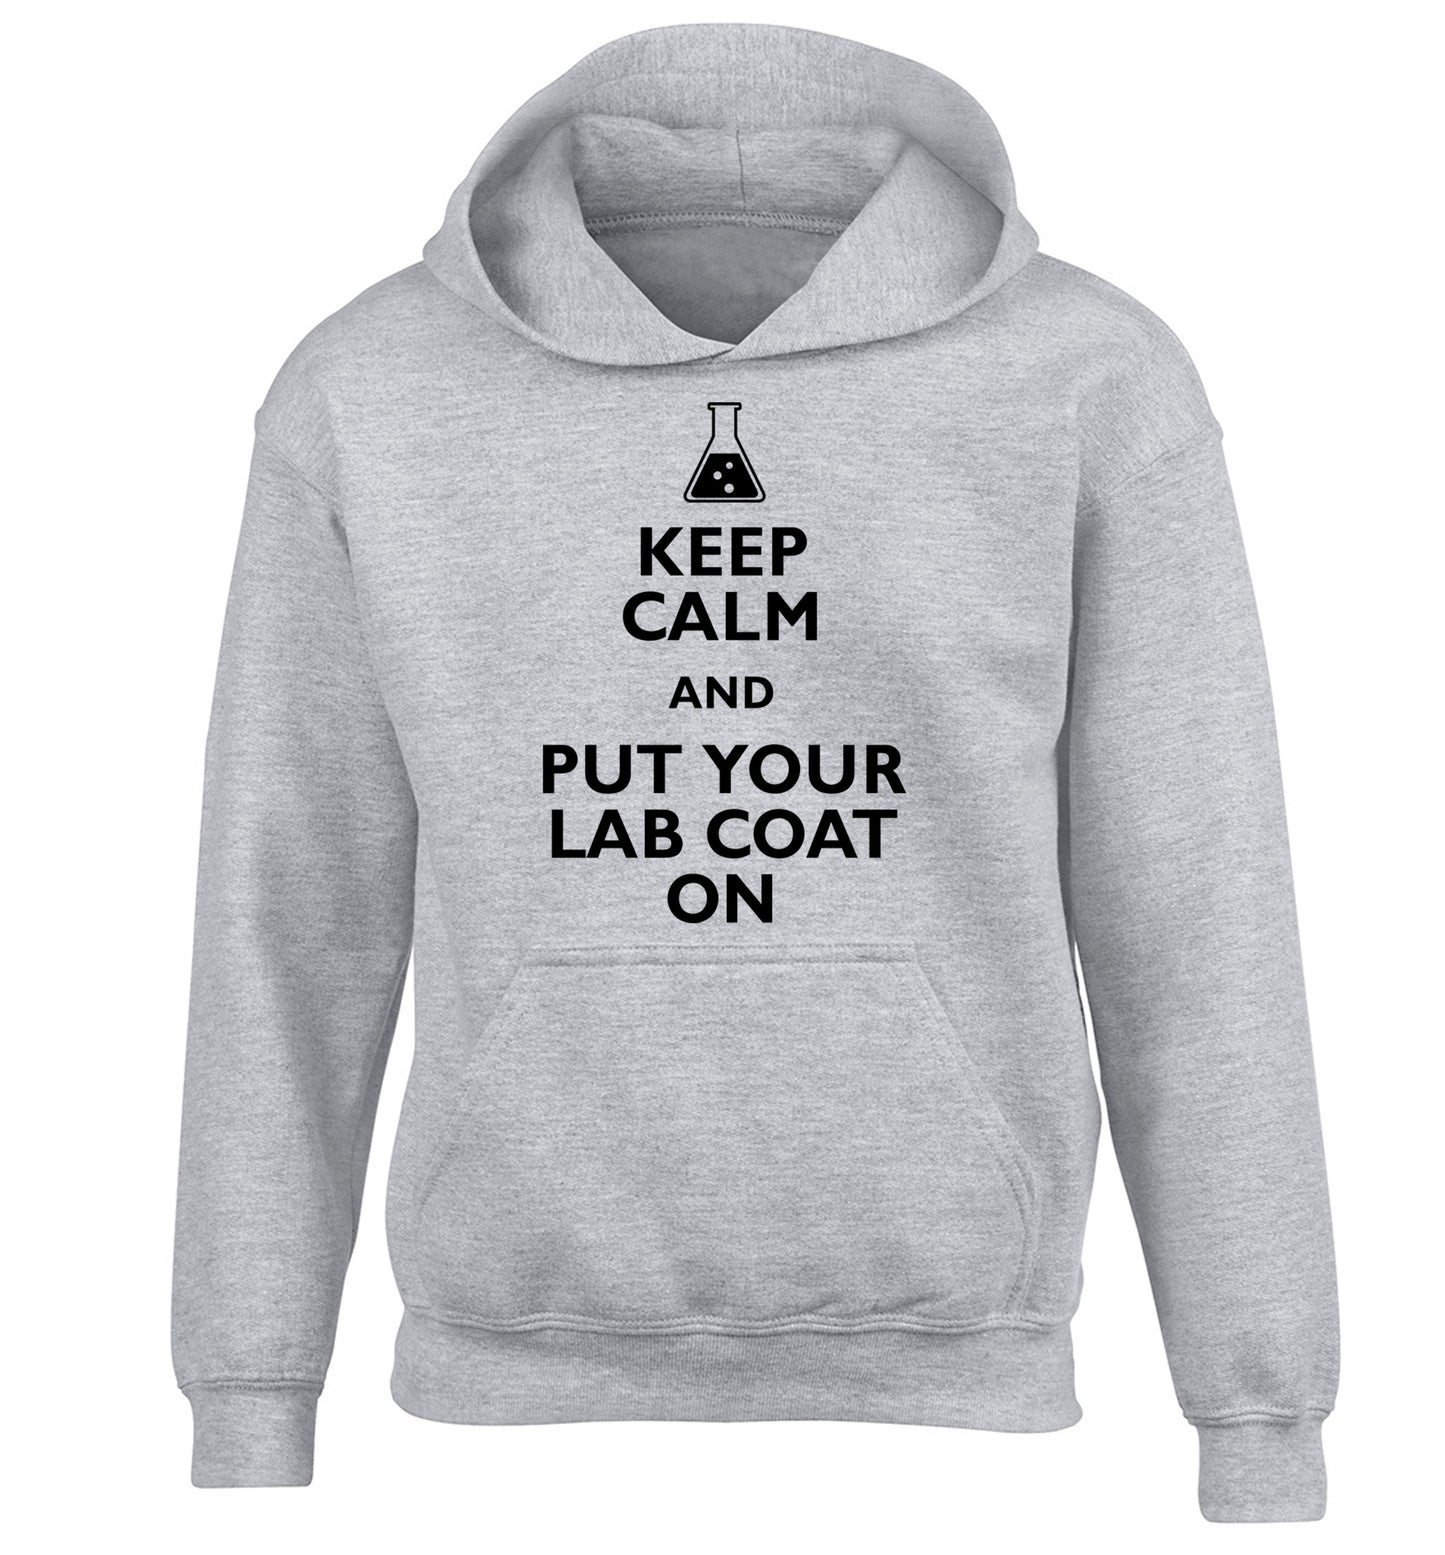 Keep calm and put your lab coat on children's grey hoodie 12-14 Years